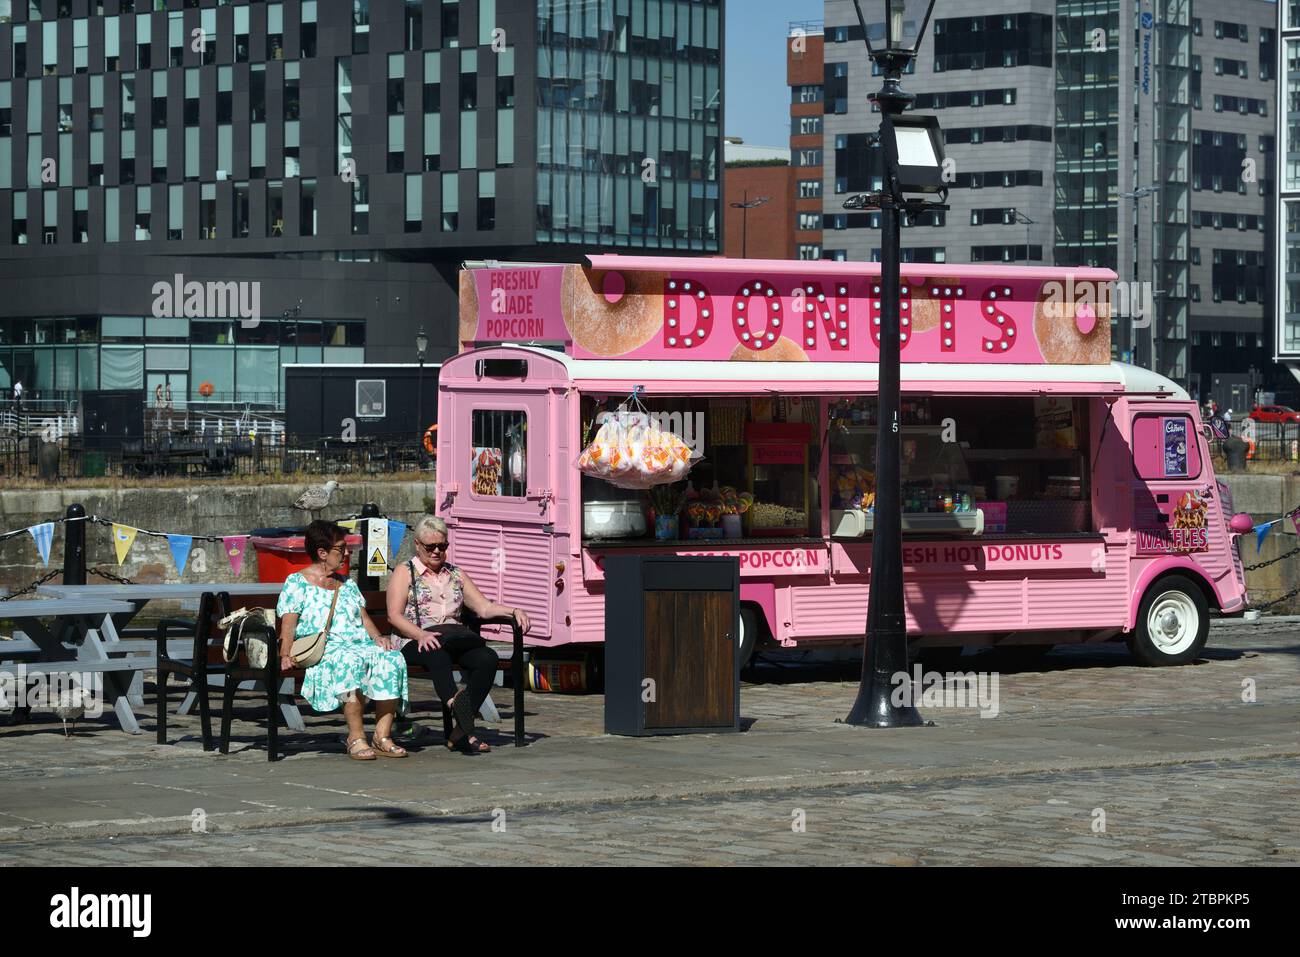 Donut Seller, Donuts or Doughnuts Street Food Truck in Converted Pink Citroen Van on the Waterfront or Pier Head Liverpool England UK Stock Photo